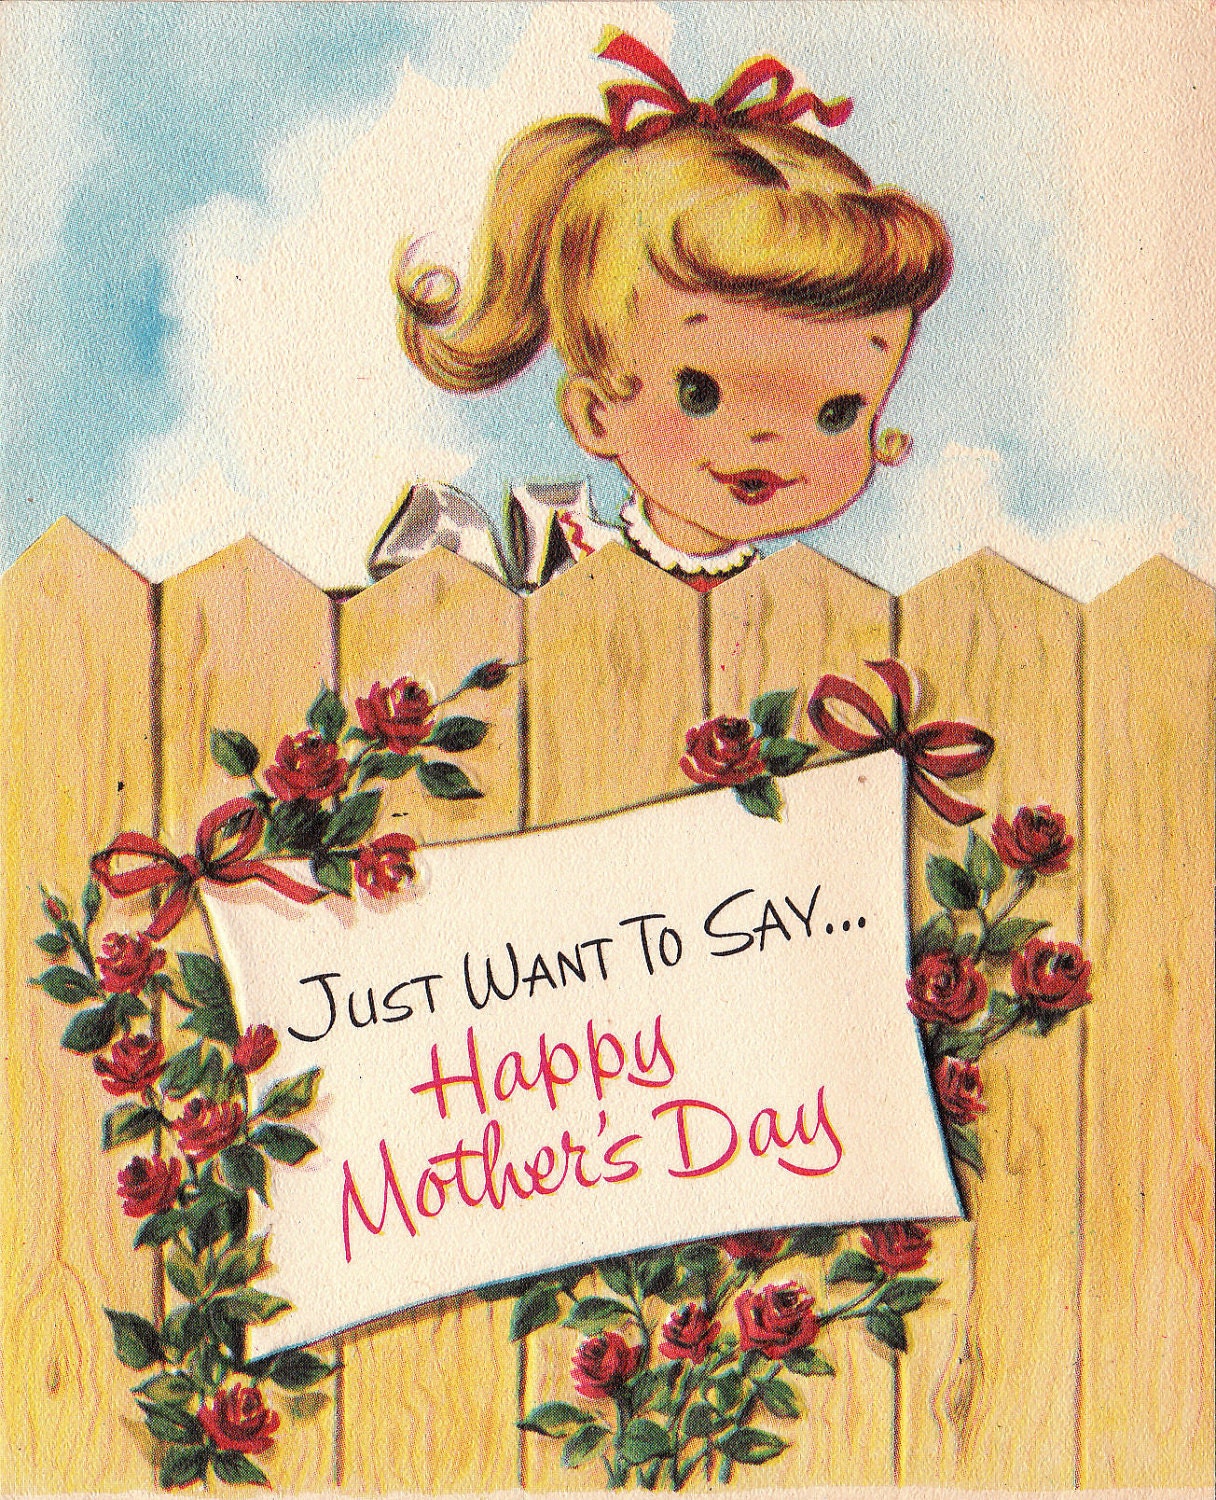 Vintage 1958 Just Want To Say Happy Mother's Day Greetings Card (B46)